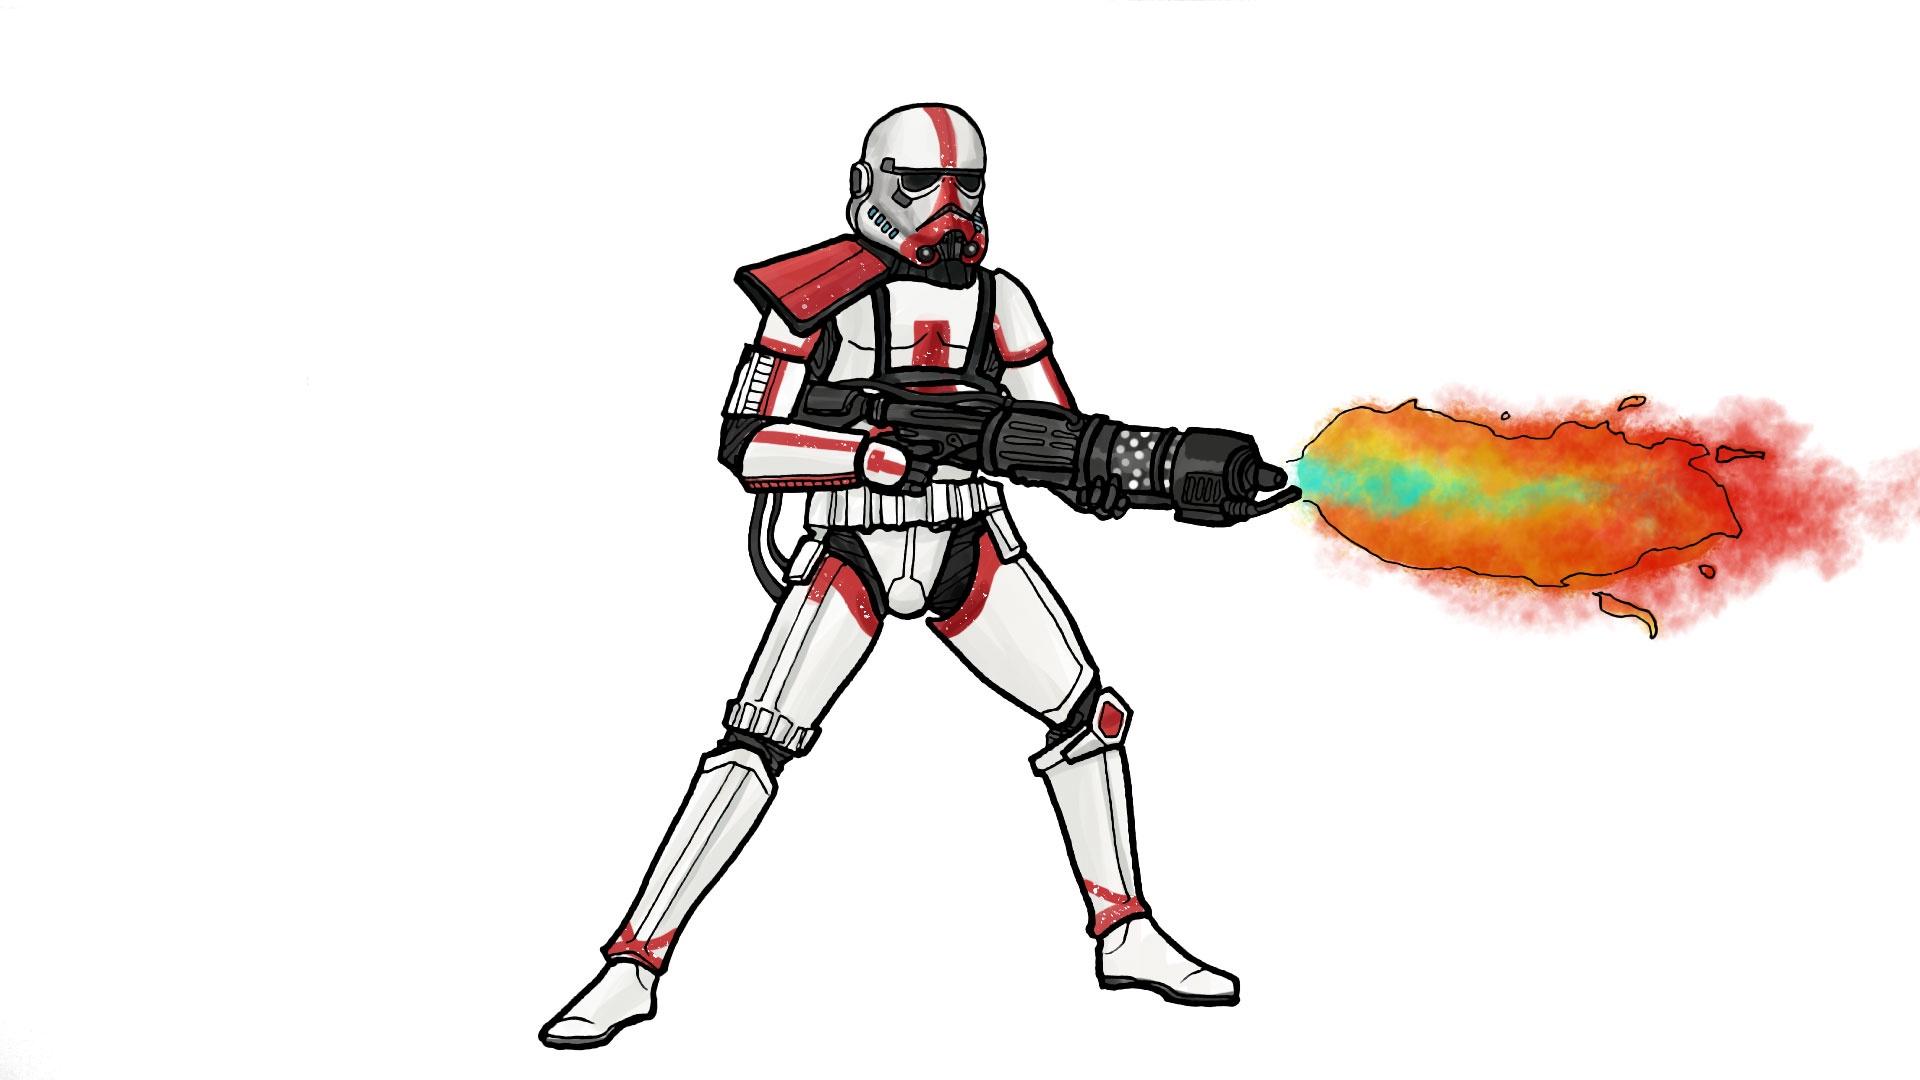 How I Draw an INCINERATOR TROOPER from the MANDALORIAN! Full tutorial is on my Youtube channel